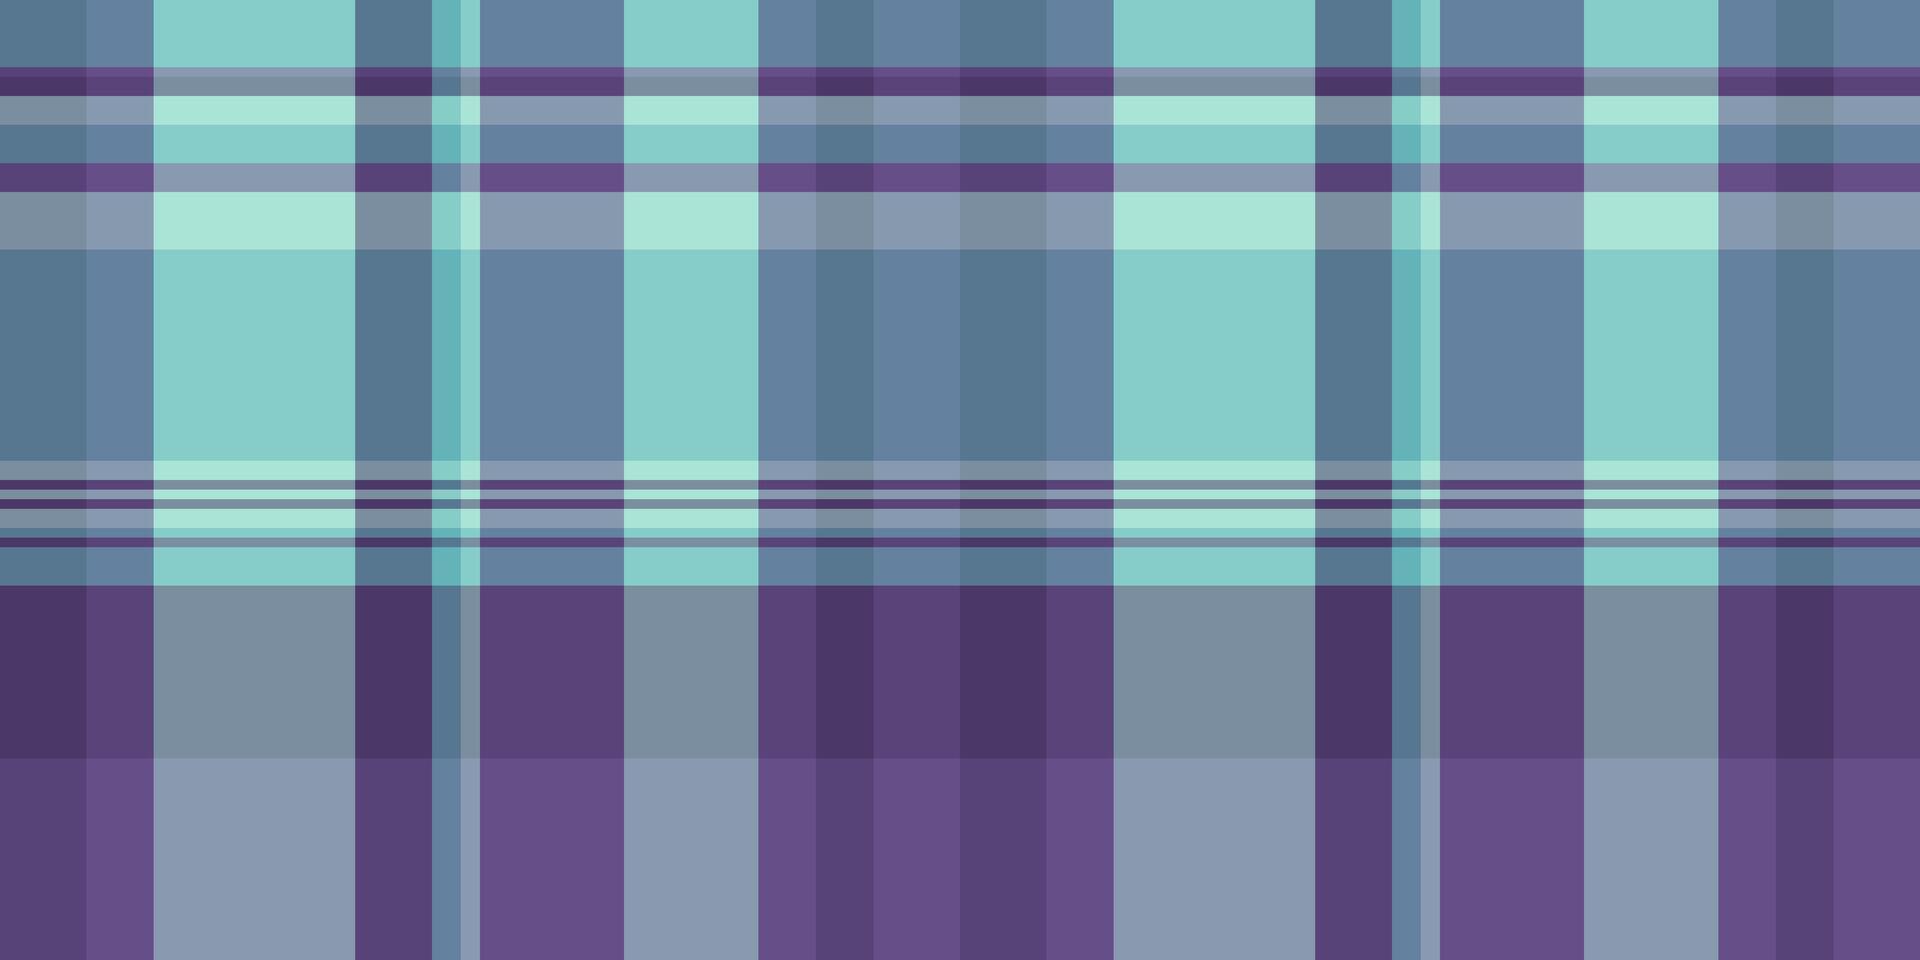 Designer texture background pattern, velvet textile fabric check. Grid seamless tartan plaid in pastel and violet colors. vector